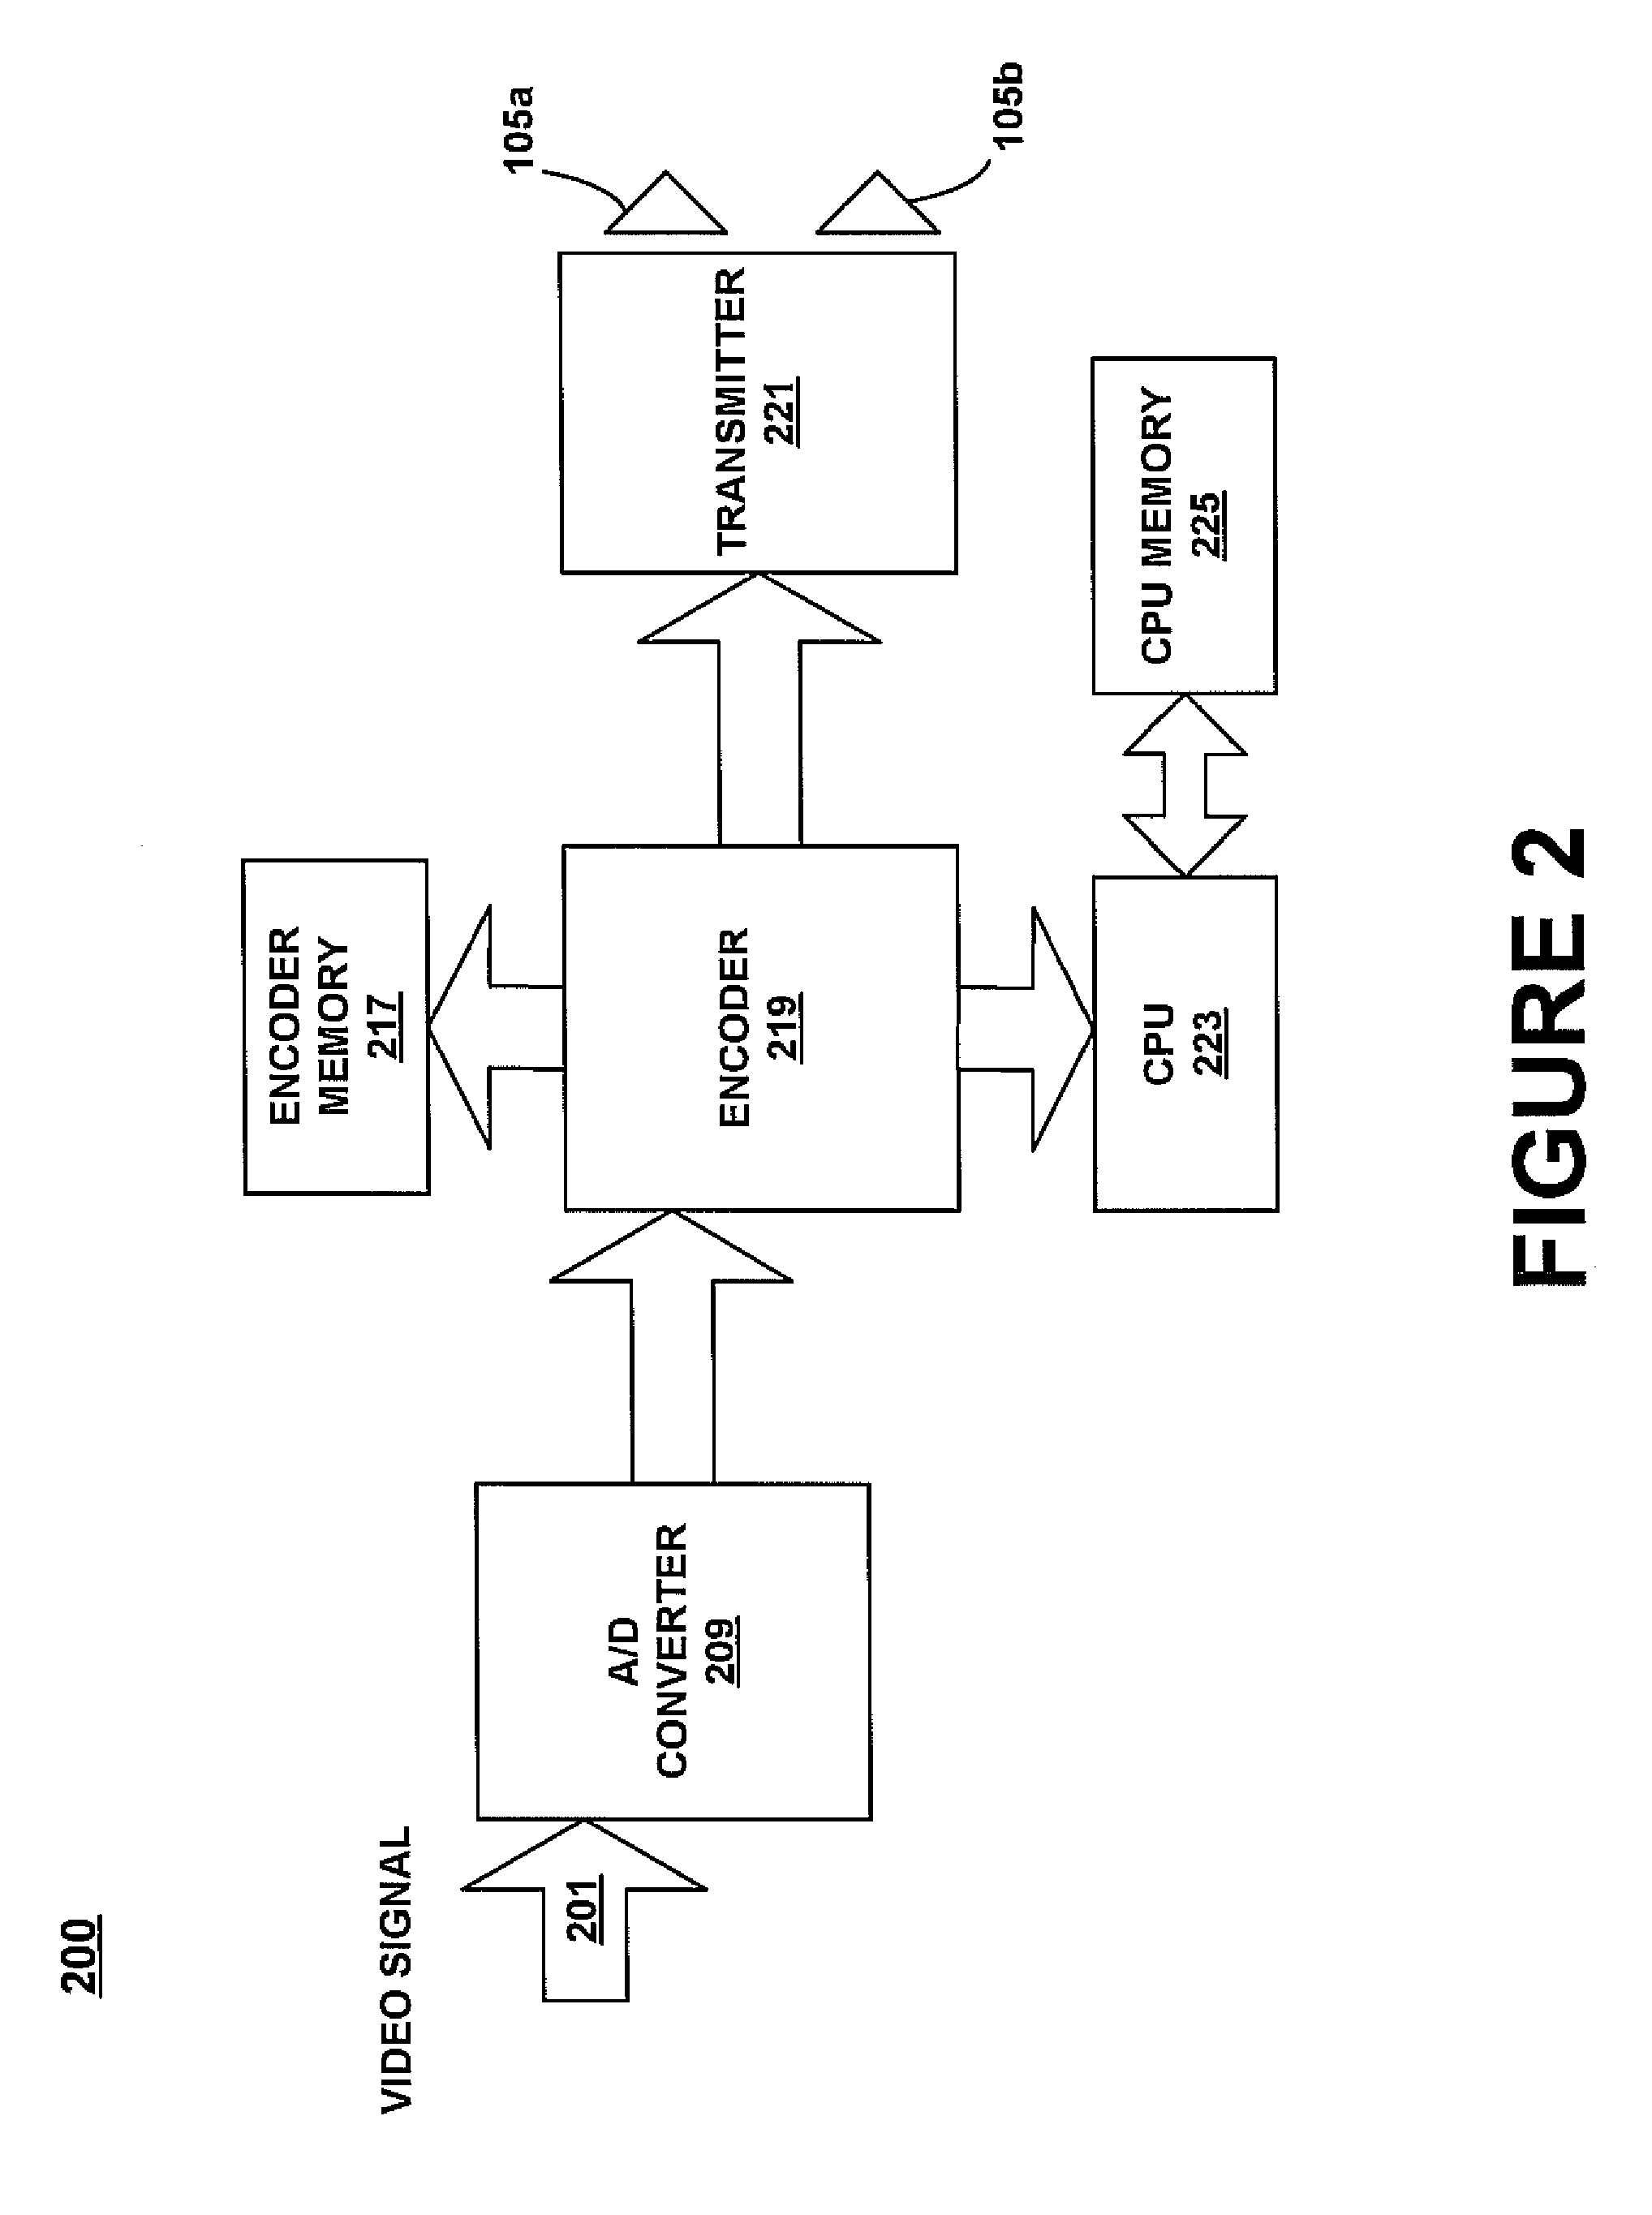 Method and system for preventing the unauthorized copying of video content